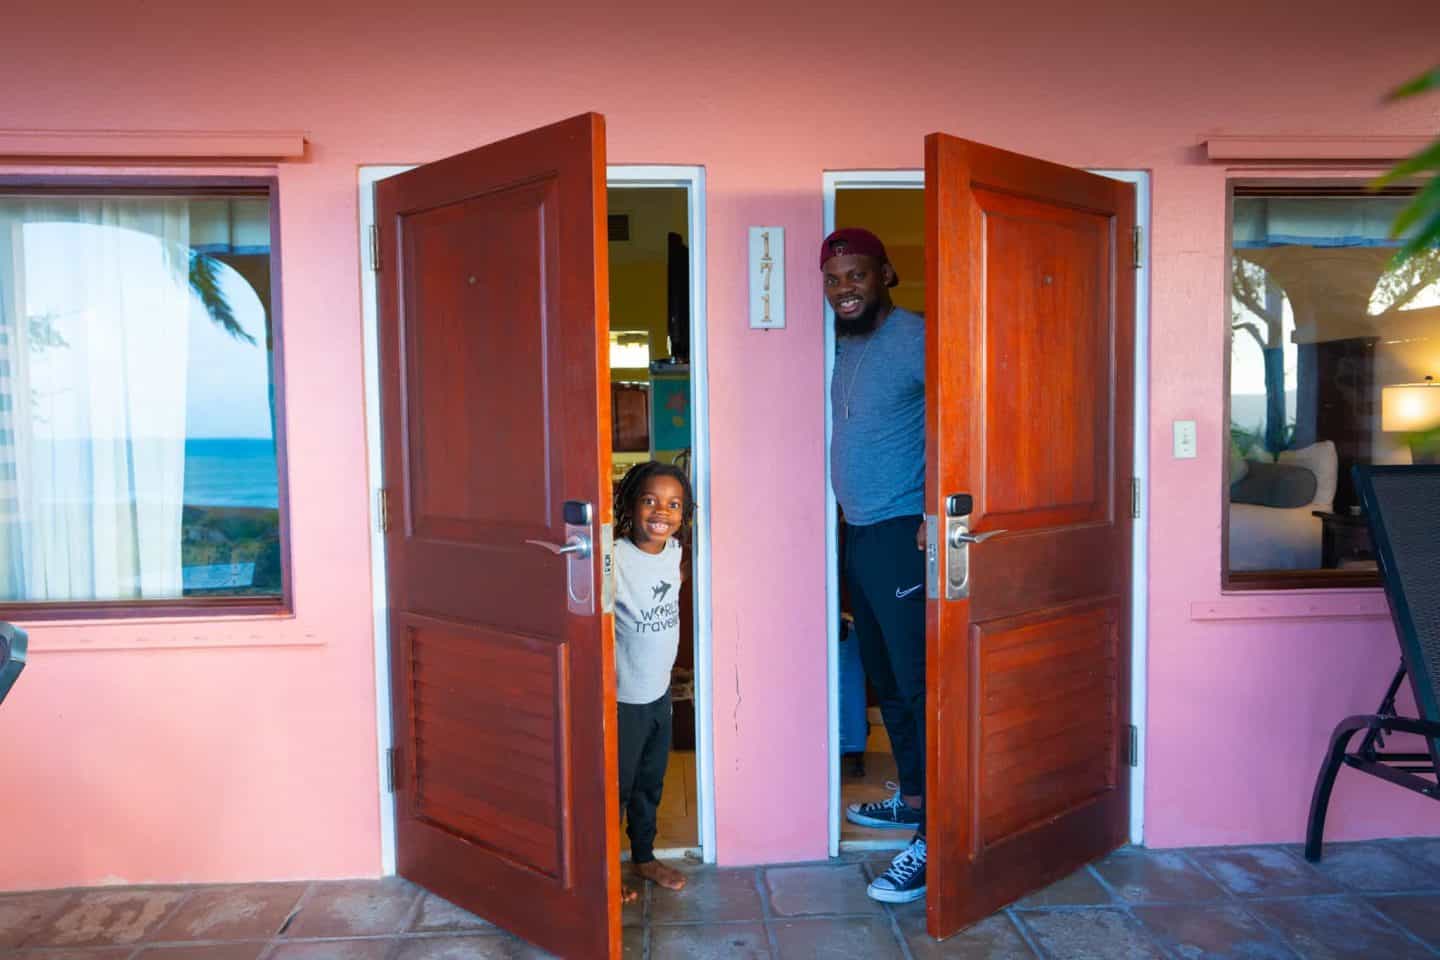 Black Family Travel Things To Do In St Croix Black Family Travel Black Travelers Black Kids Travel Black Family Traveling The World Black Worldschoolers African American Family 12